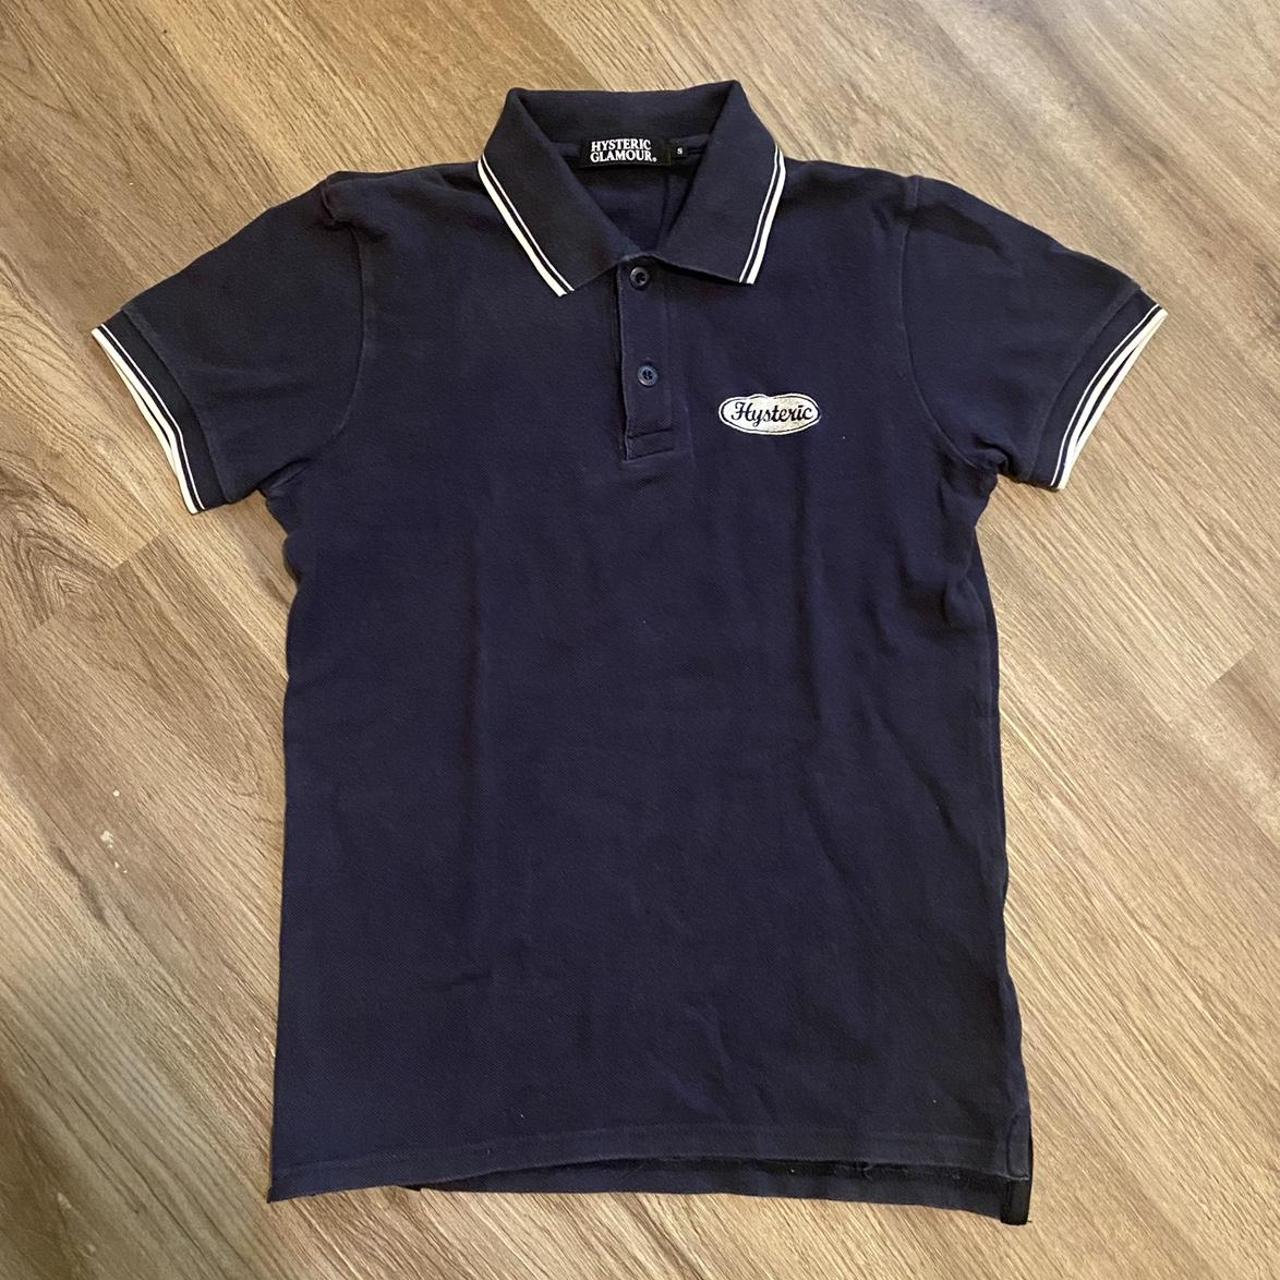 Hysteric Glamour iconic vintage polo shirt - Depop